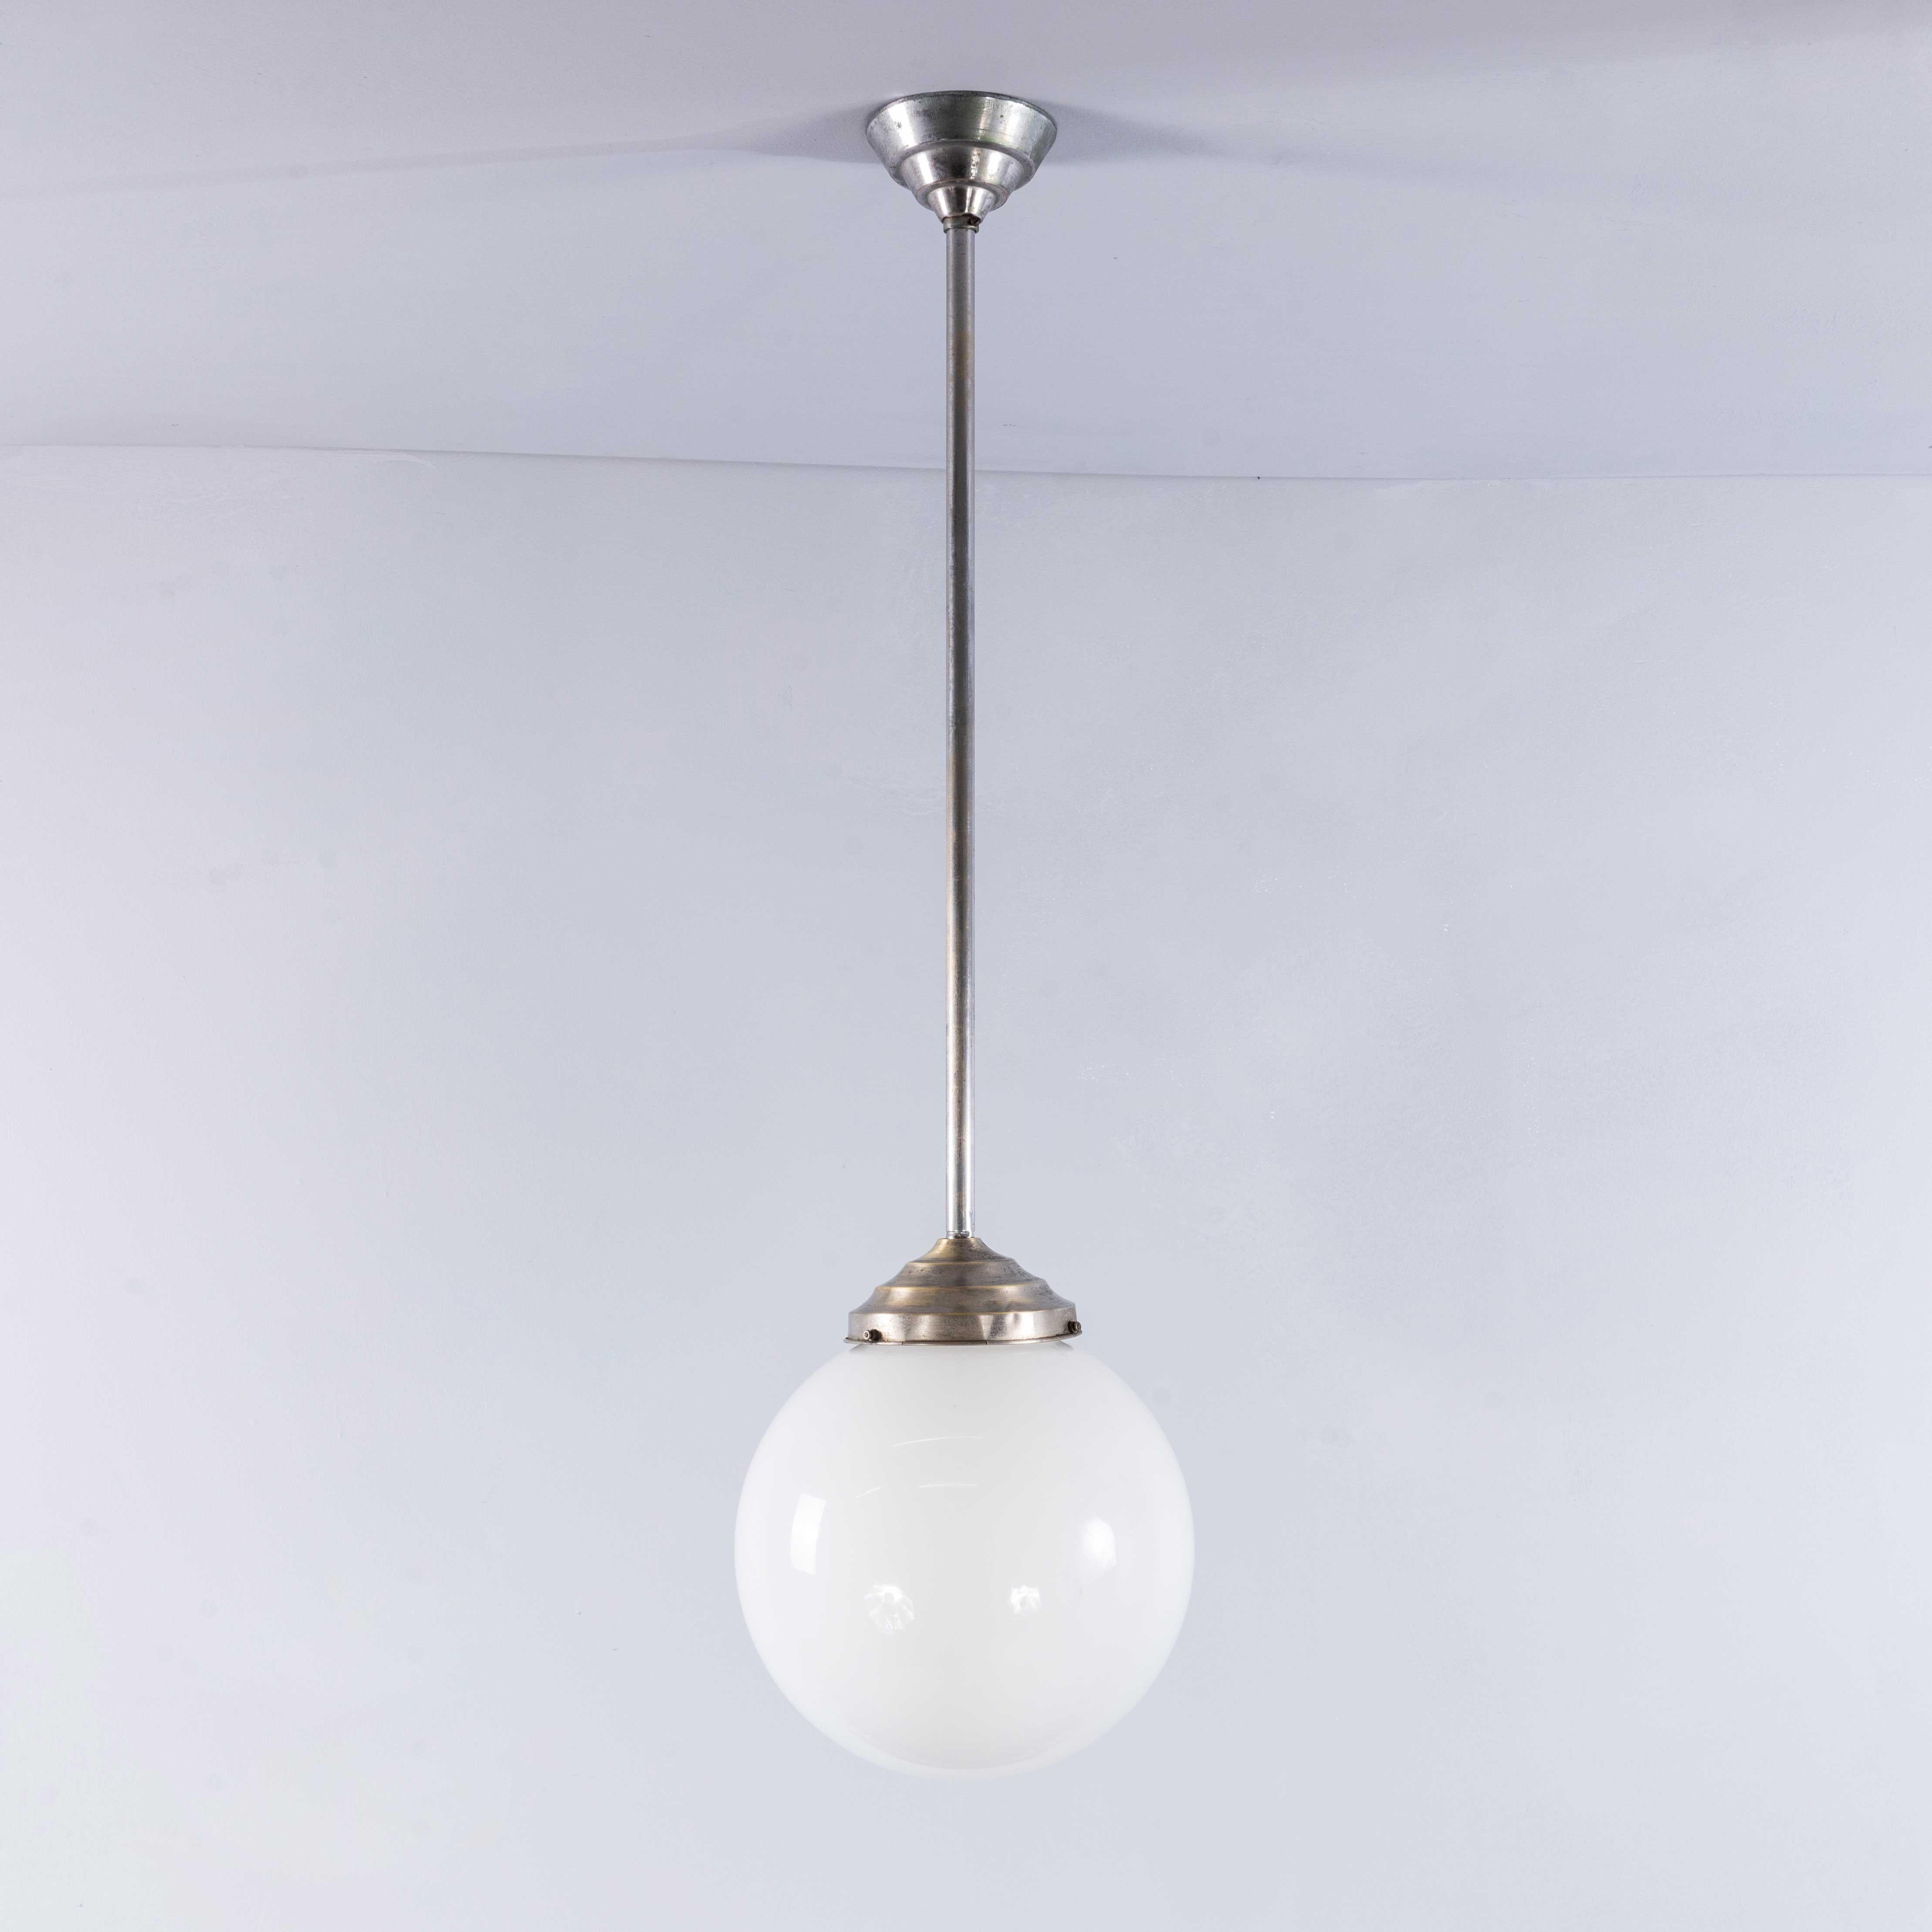 1950’s Original French Tabac Opal Glass Pendant Lamp – Single (958.11)
1950’s Original French Tabac Opal Glass Pendant Lamp – Single. Stunning original pendant lamp from a Tabac in France. The opal shade is the original glass and the galleries and